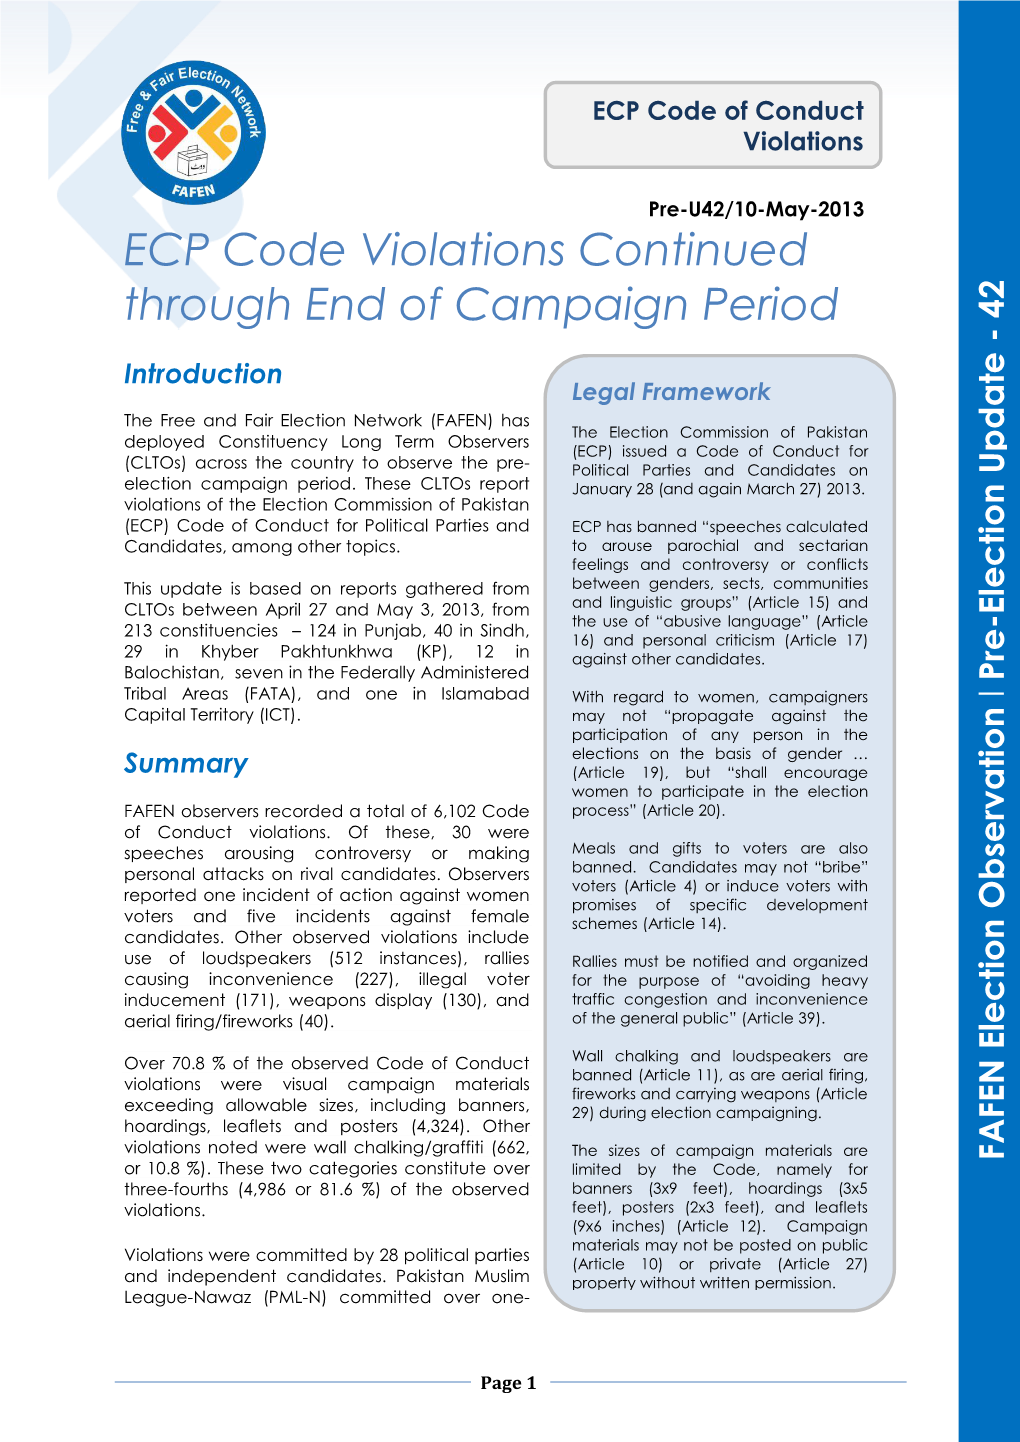 ECP Code Violations Continued Through End of Campaign Period